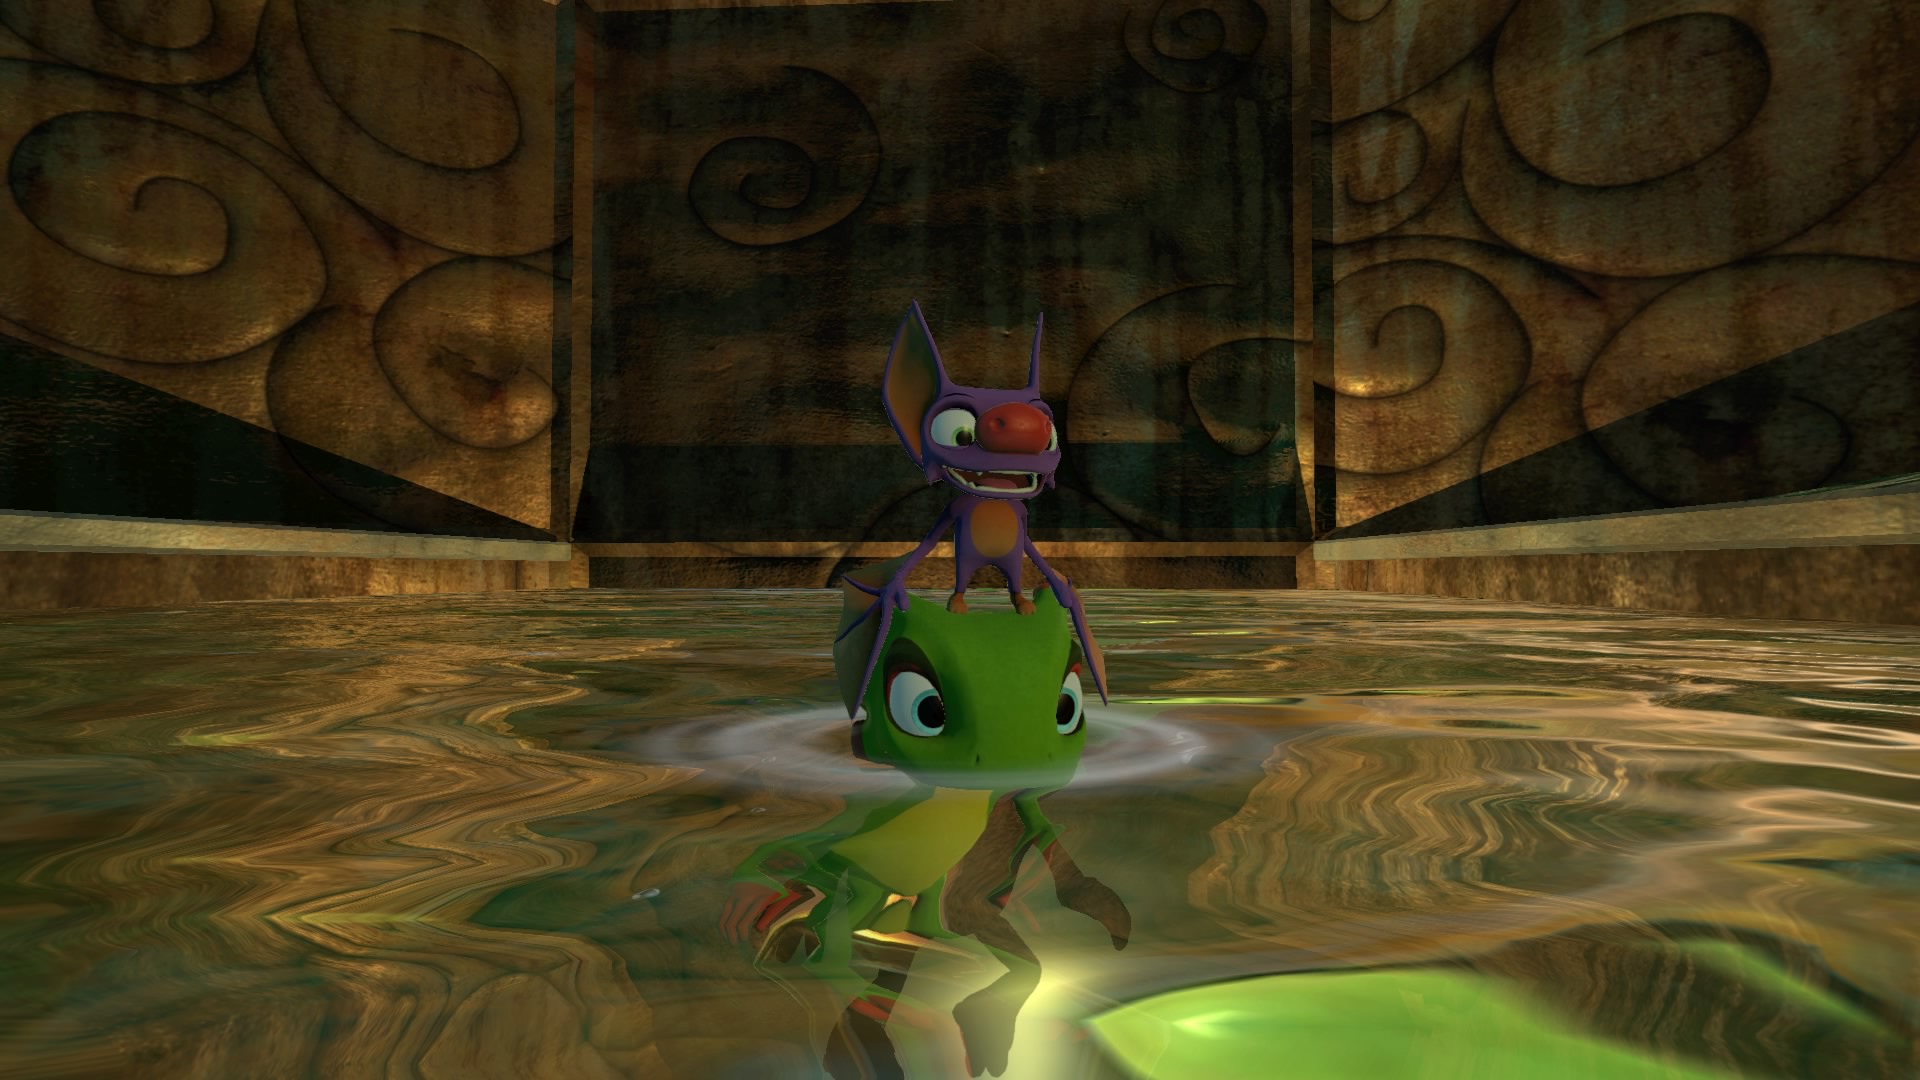 Laylee perched on Yooka's head as he swims.